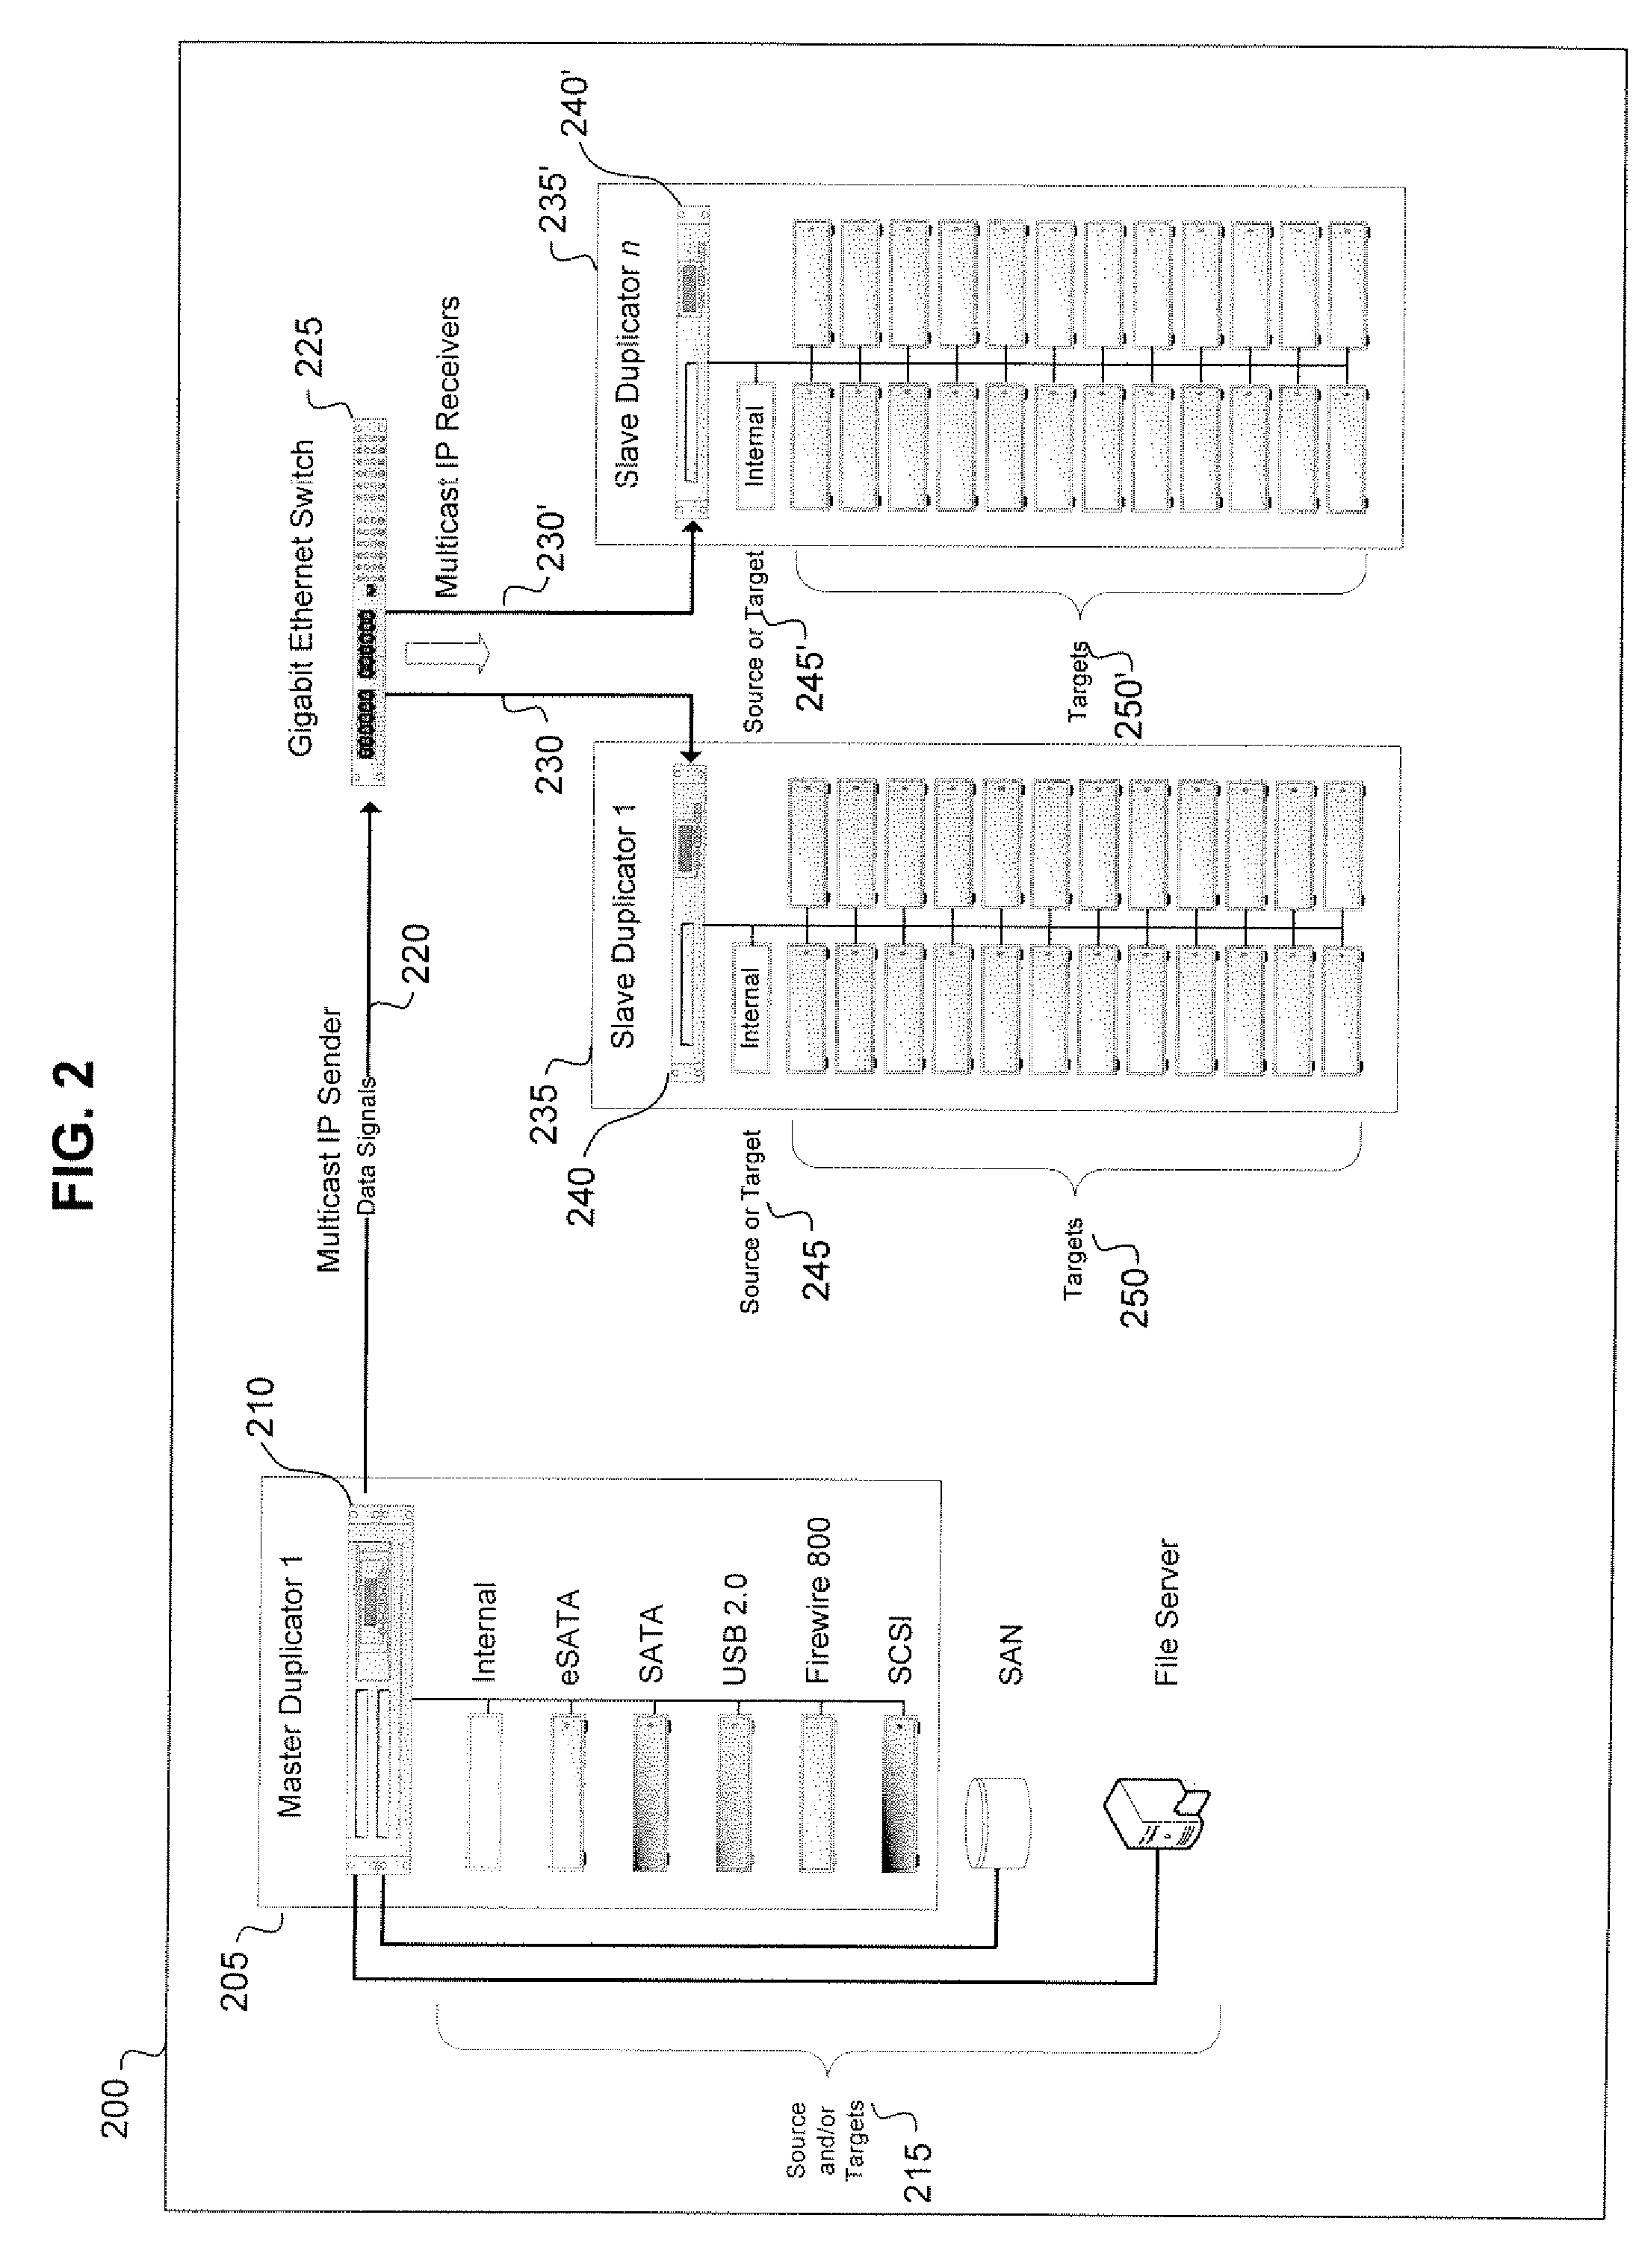 Method and apparatus for media duplication